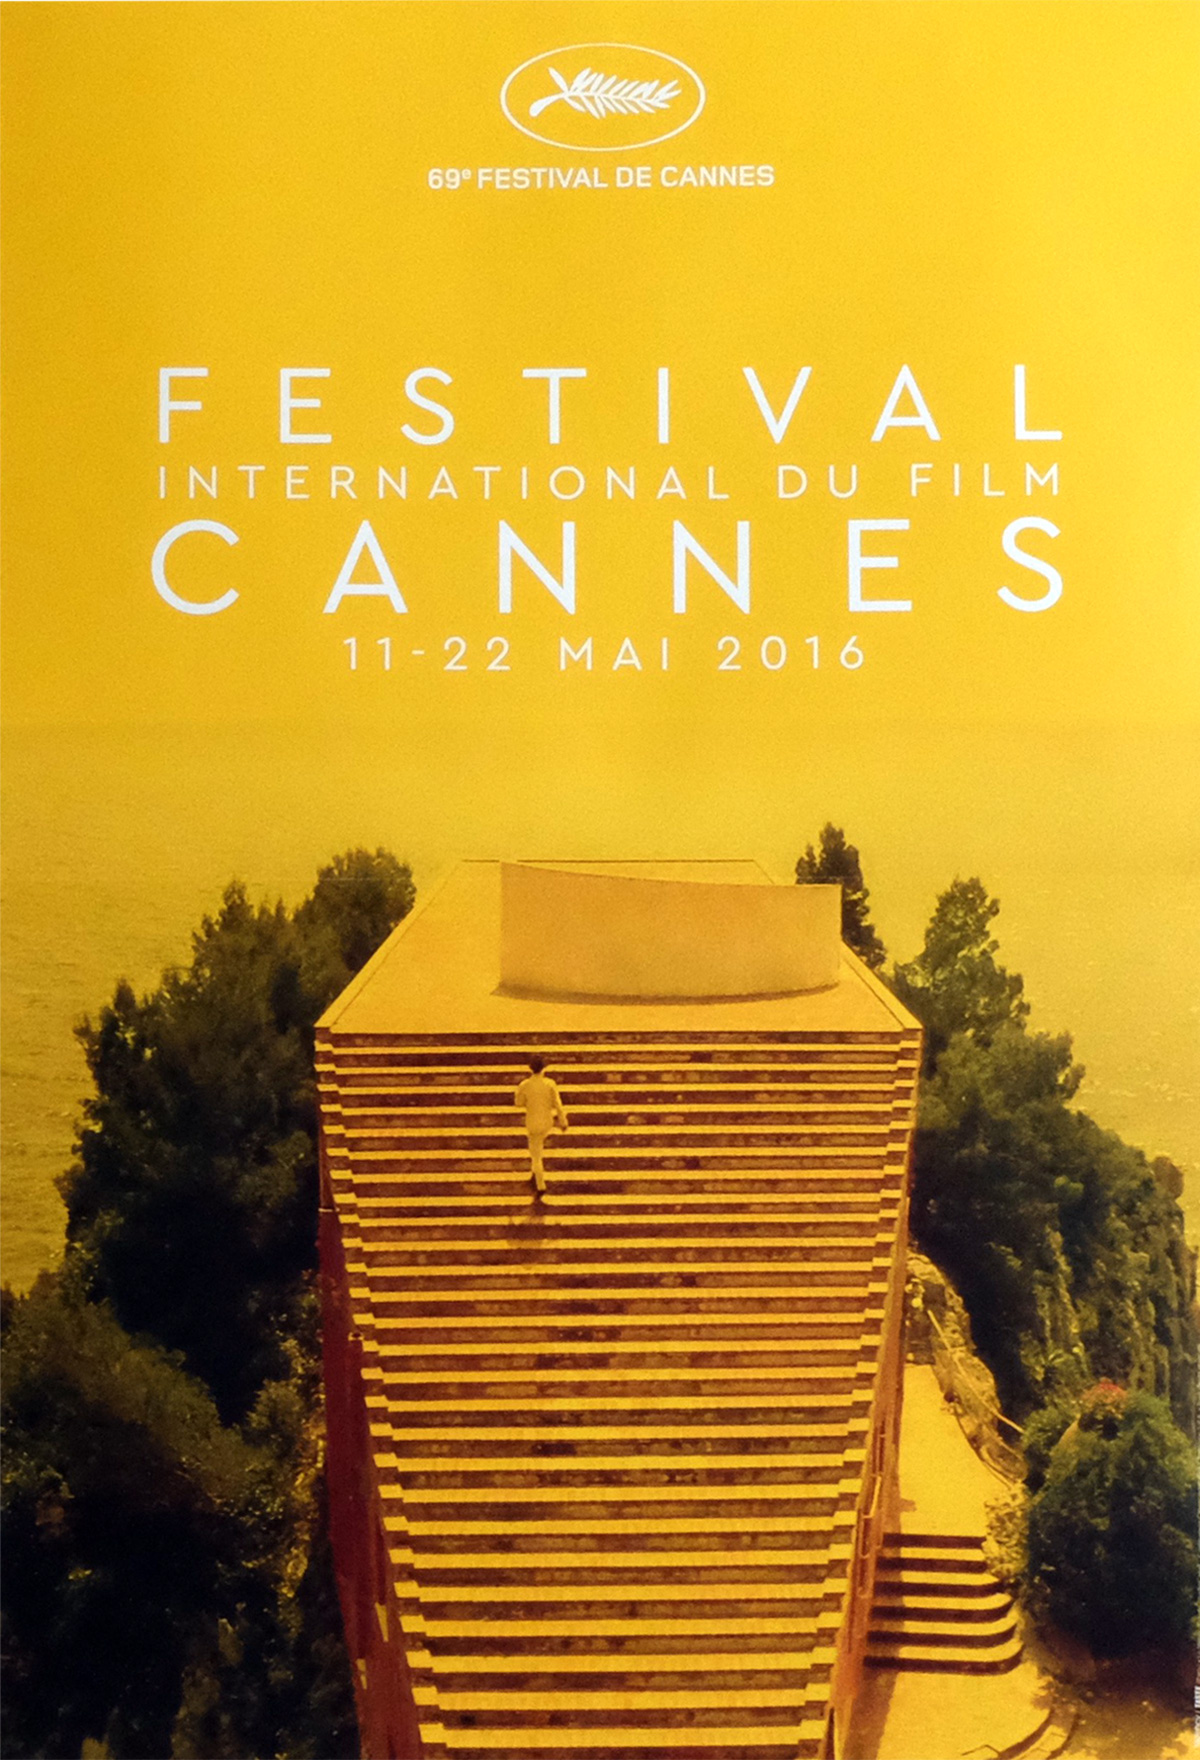 ORIGINAL FRENCH POSTER 23 x 33 in CANNES FILM FESTIVAL 2002